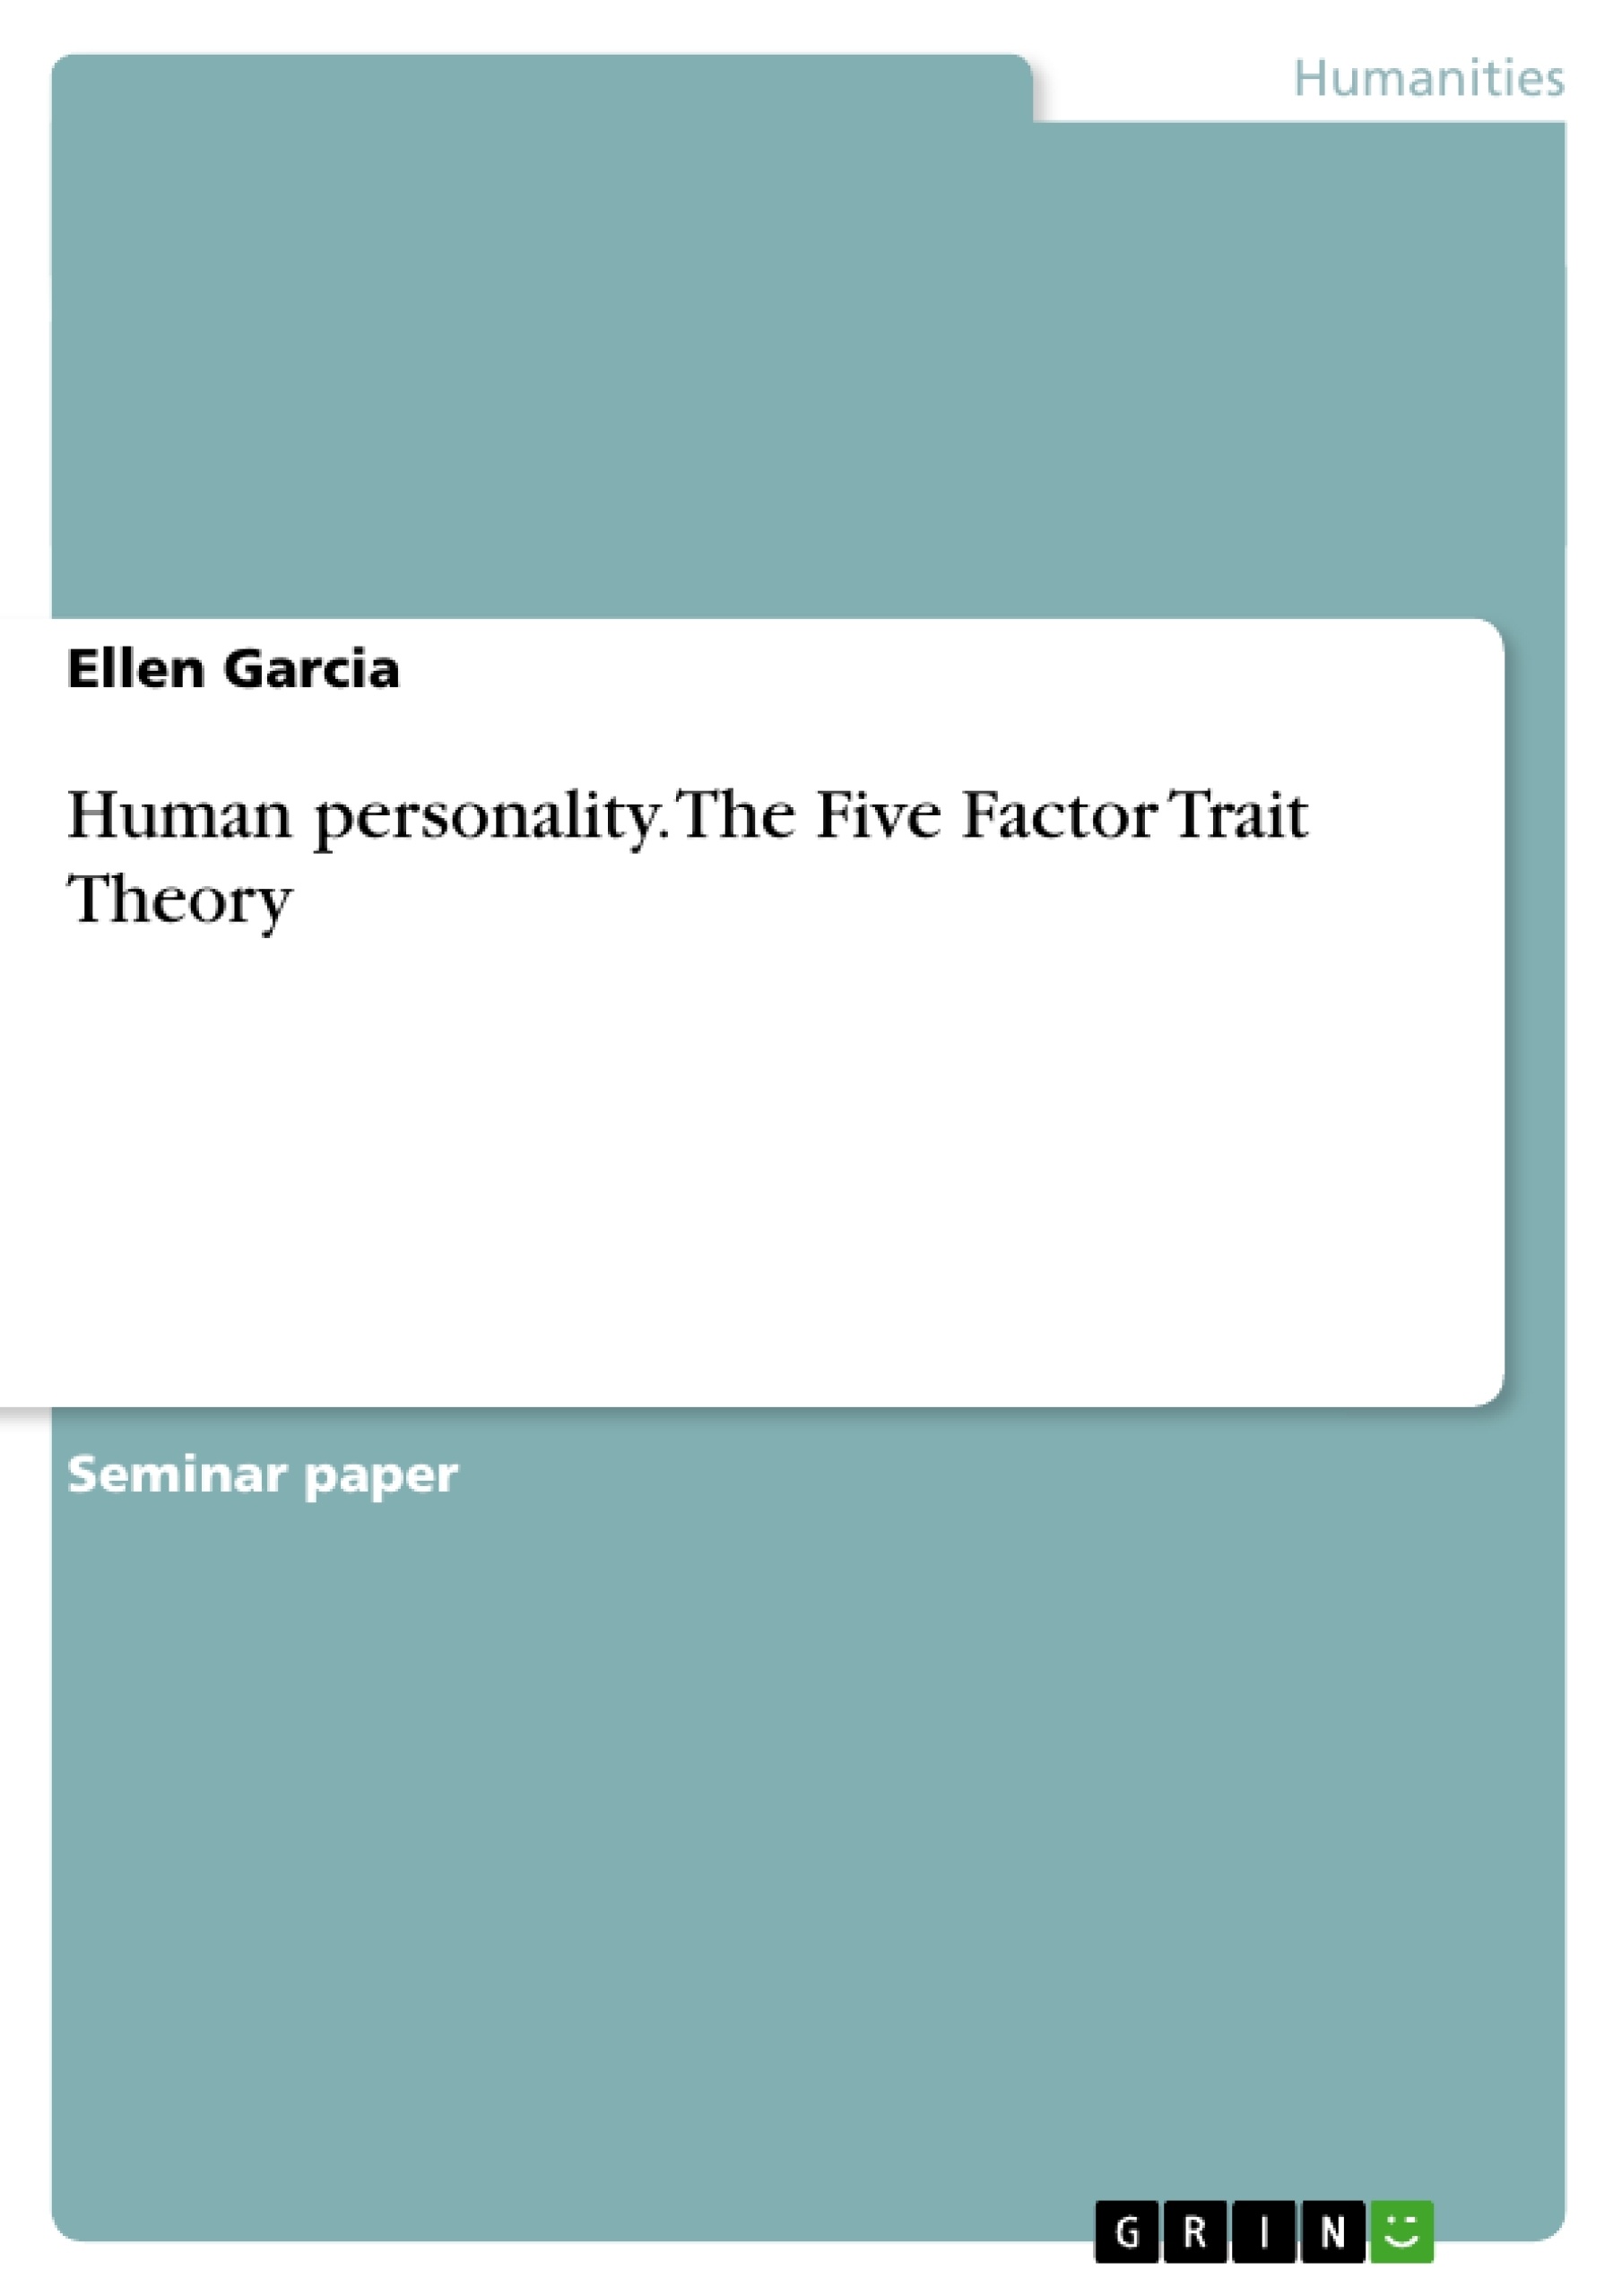 Title: Human personality. The Five Factor Trait Theory